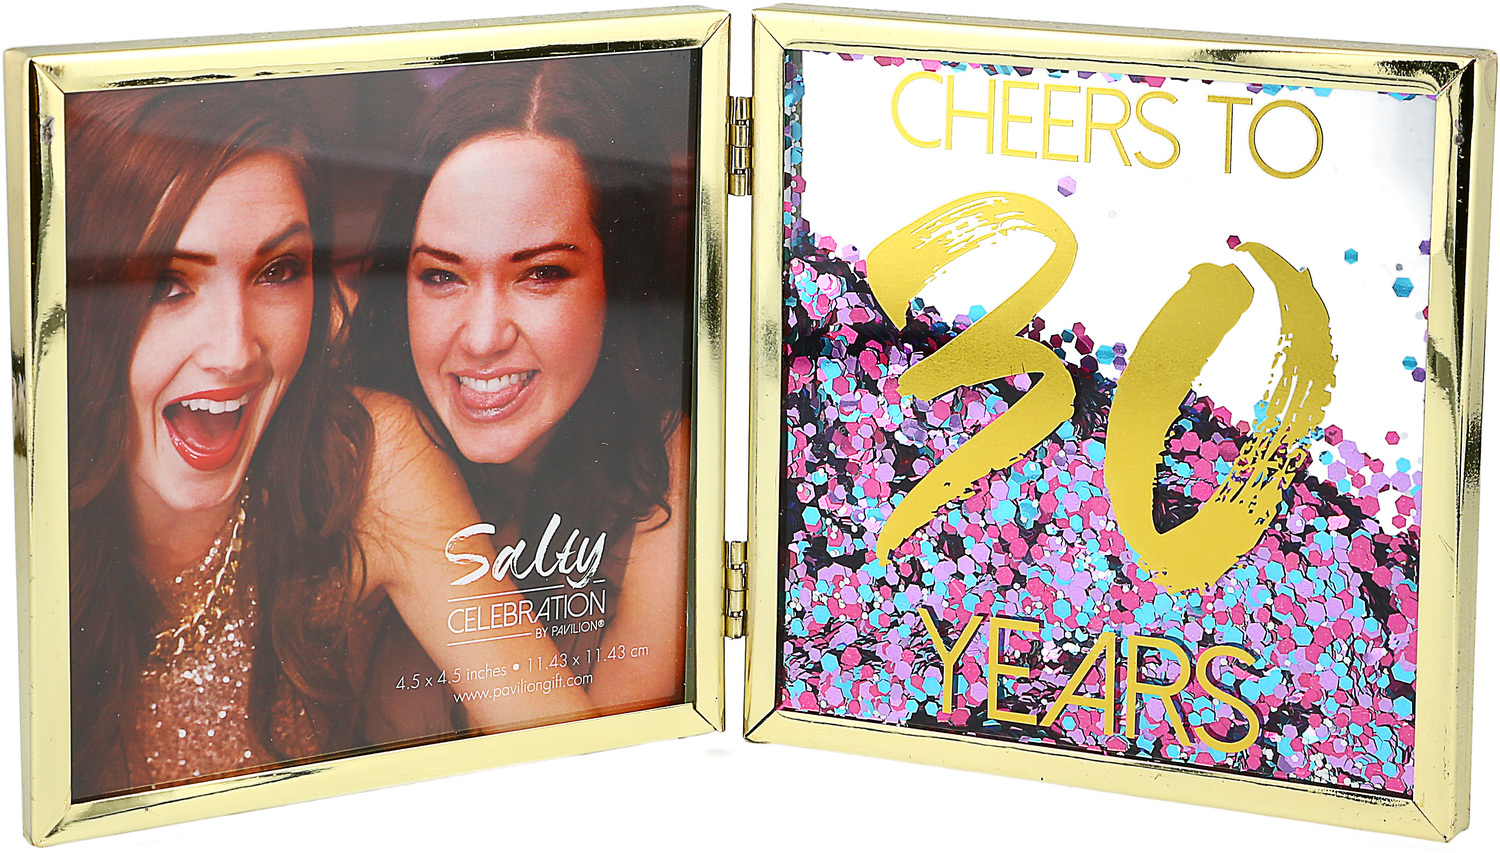 Cheers to 30 by Salty Celebration - Cheers to 30 - 4.75" Hinged Sentiment Frame